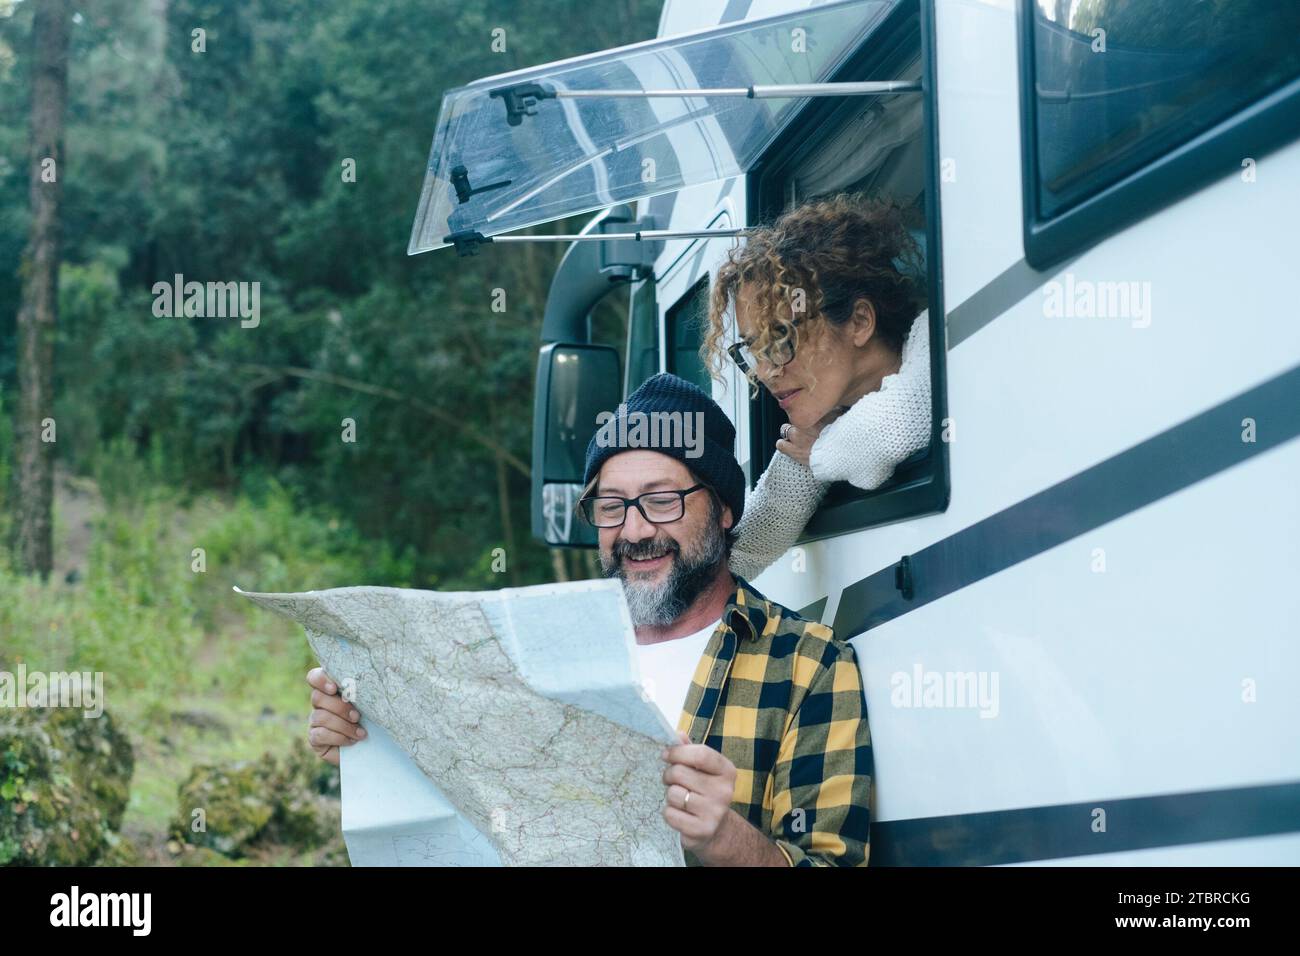 Happy traveler couple adult man and woman looking together a map guide to choose next destination. Vanlife and travel adventure vacation with camper van motorhome modern vehicle lifestyle. Nature Stock Photo